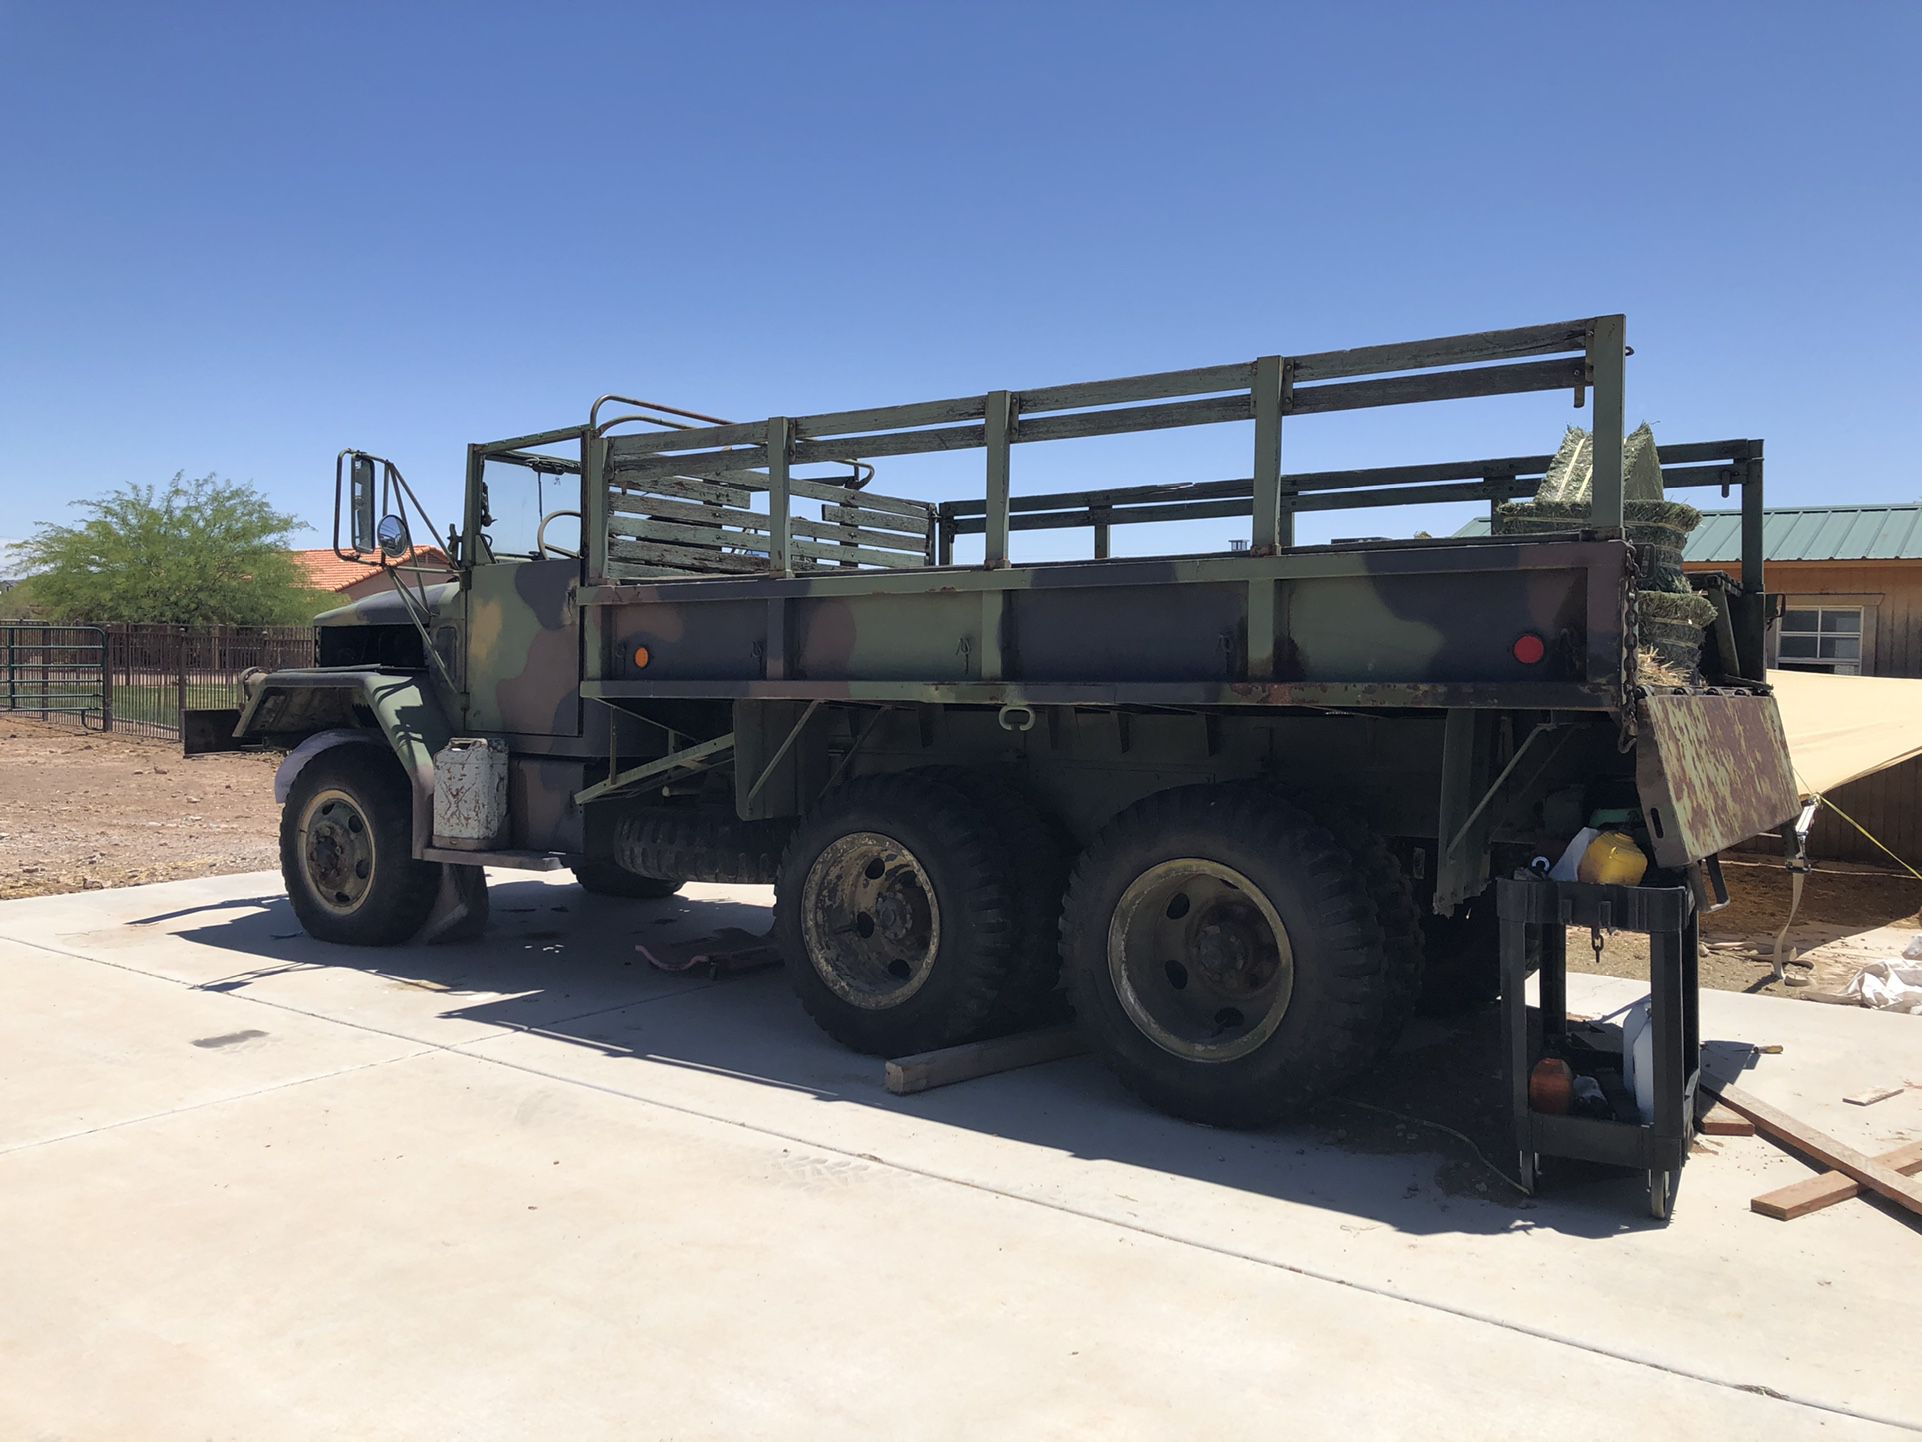 M35a2 Military Vehicle